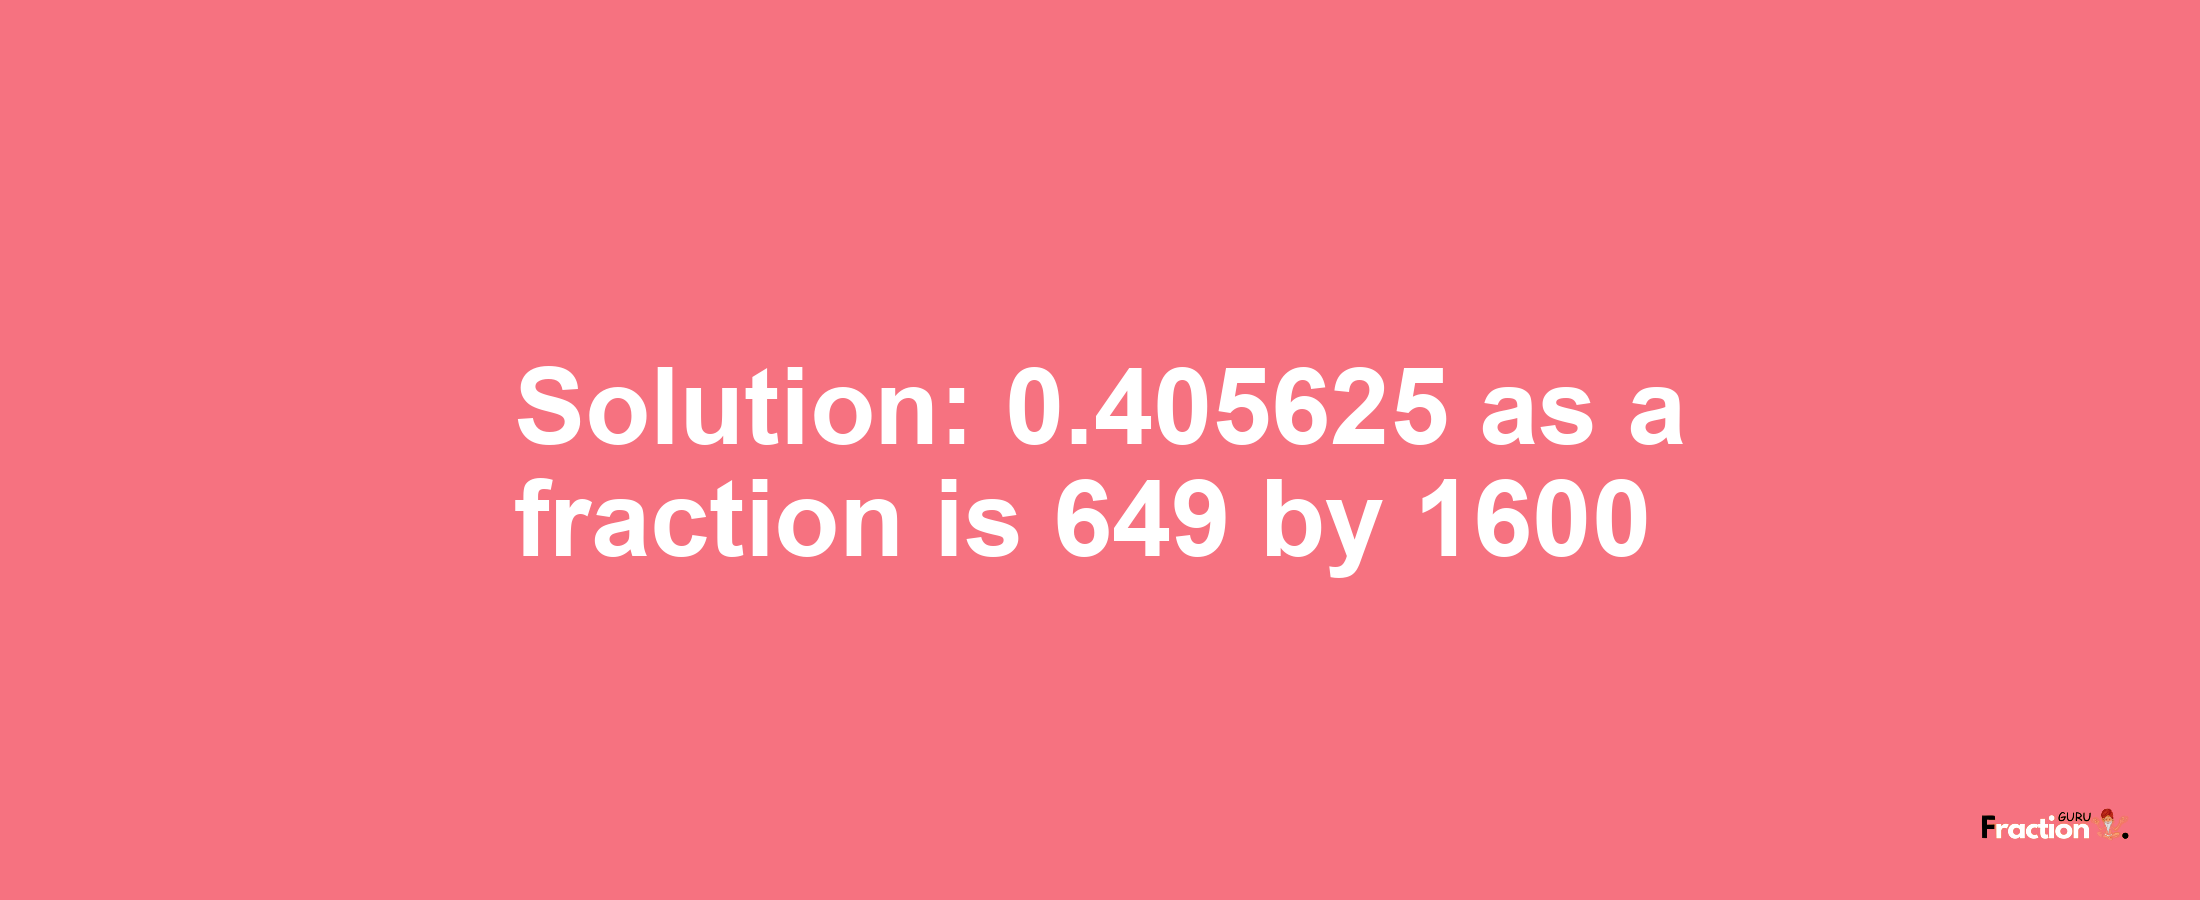 Solution:0.405625 as a fraction is 649/1600